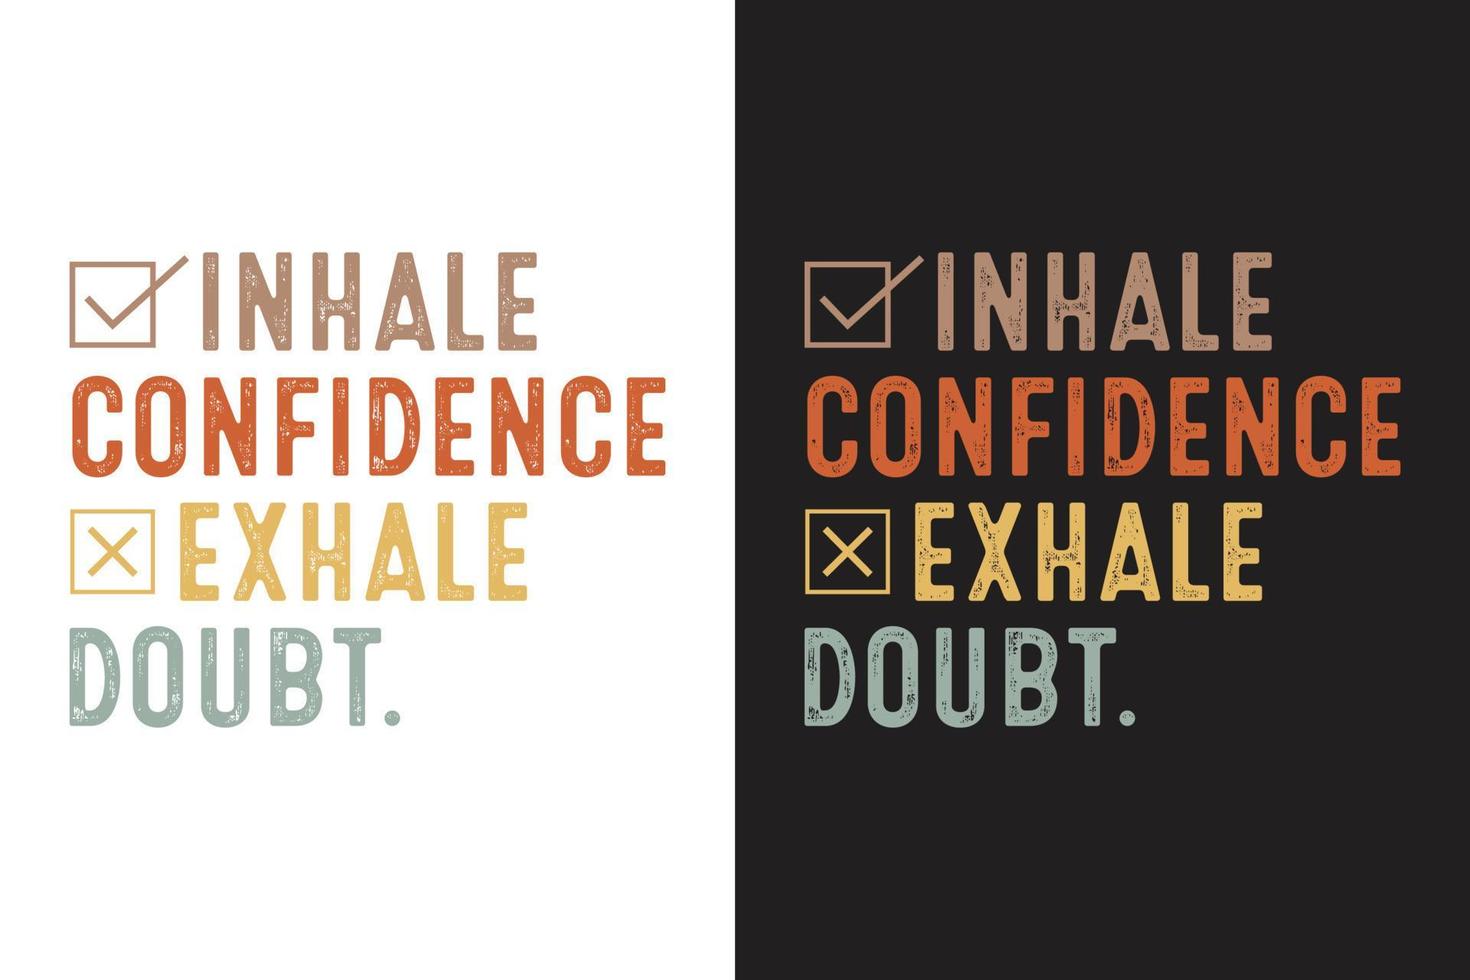 Inhale confidence, exhale doubt motivational quotes hand drawn lettering for posters, print, t-shirts, mugs, etc vector